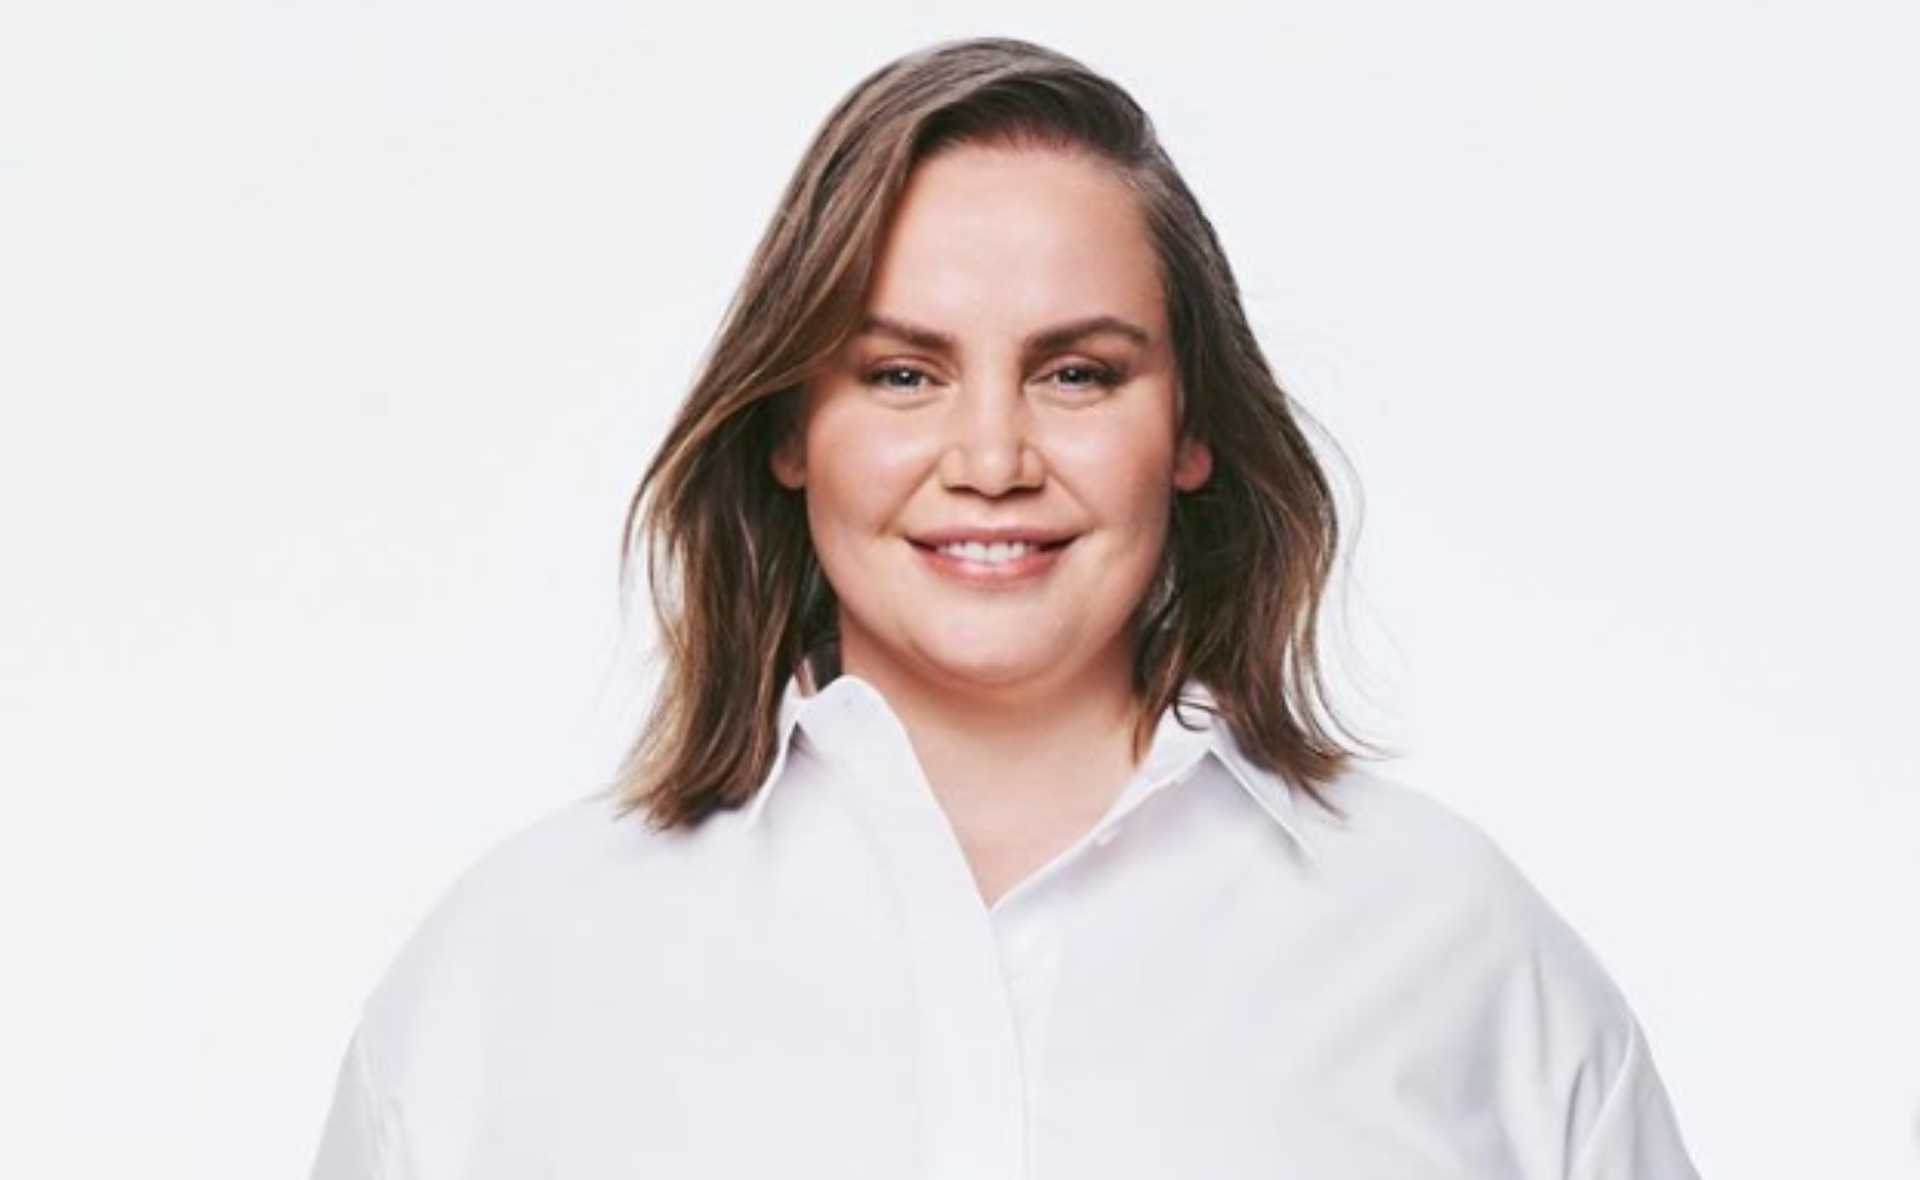 “I have survived”: Tennis star Jelena Dokic shares candid insight into her mental health journey